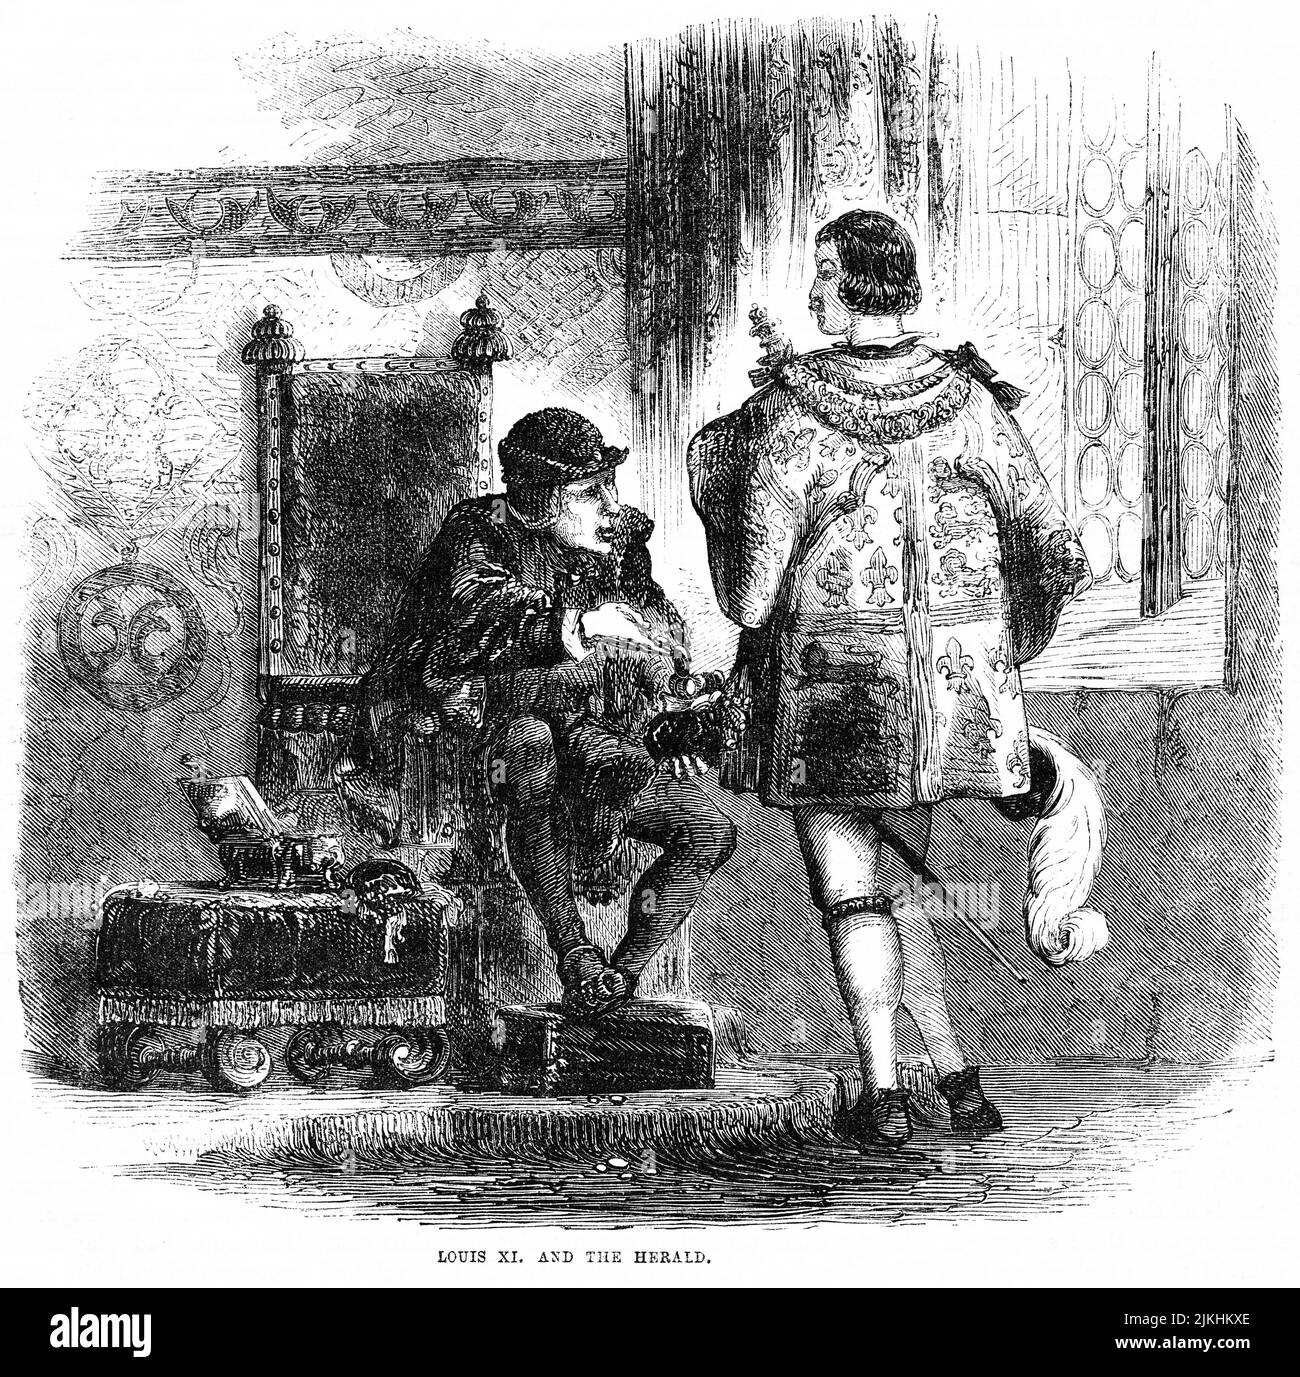 Louis XI and the Herald, Illustration from the Book, 'John Cassel’s Illustrated History of England, Volume II', text by William Howitt, Cassell, Petter, and Galpin, London, 1858 Stock Photo